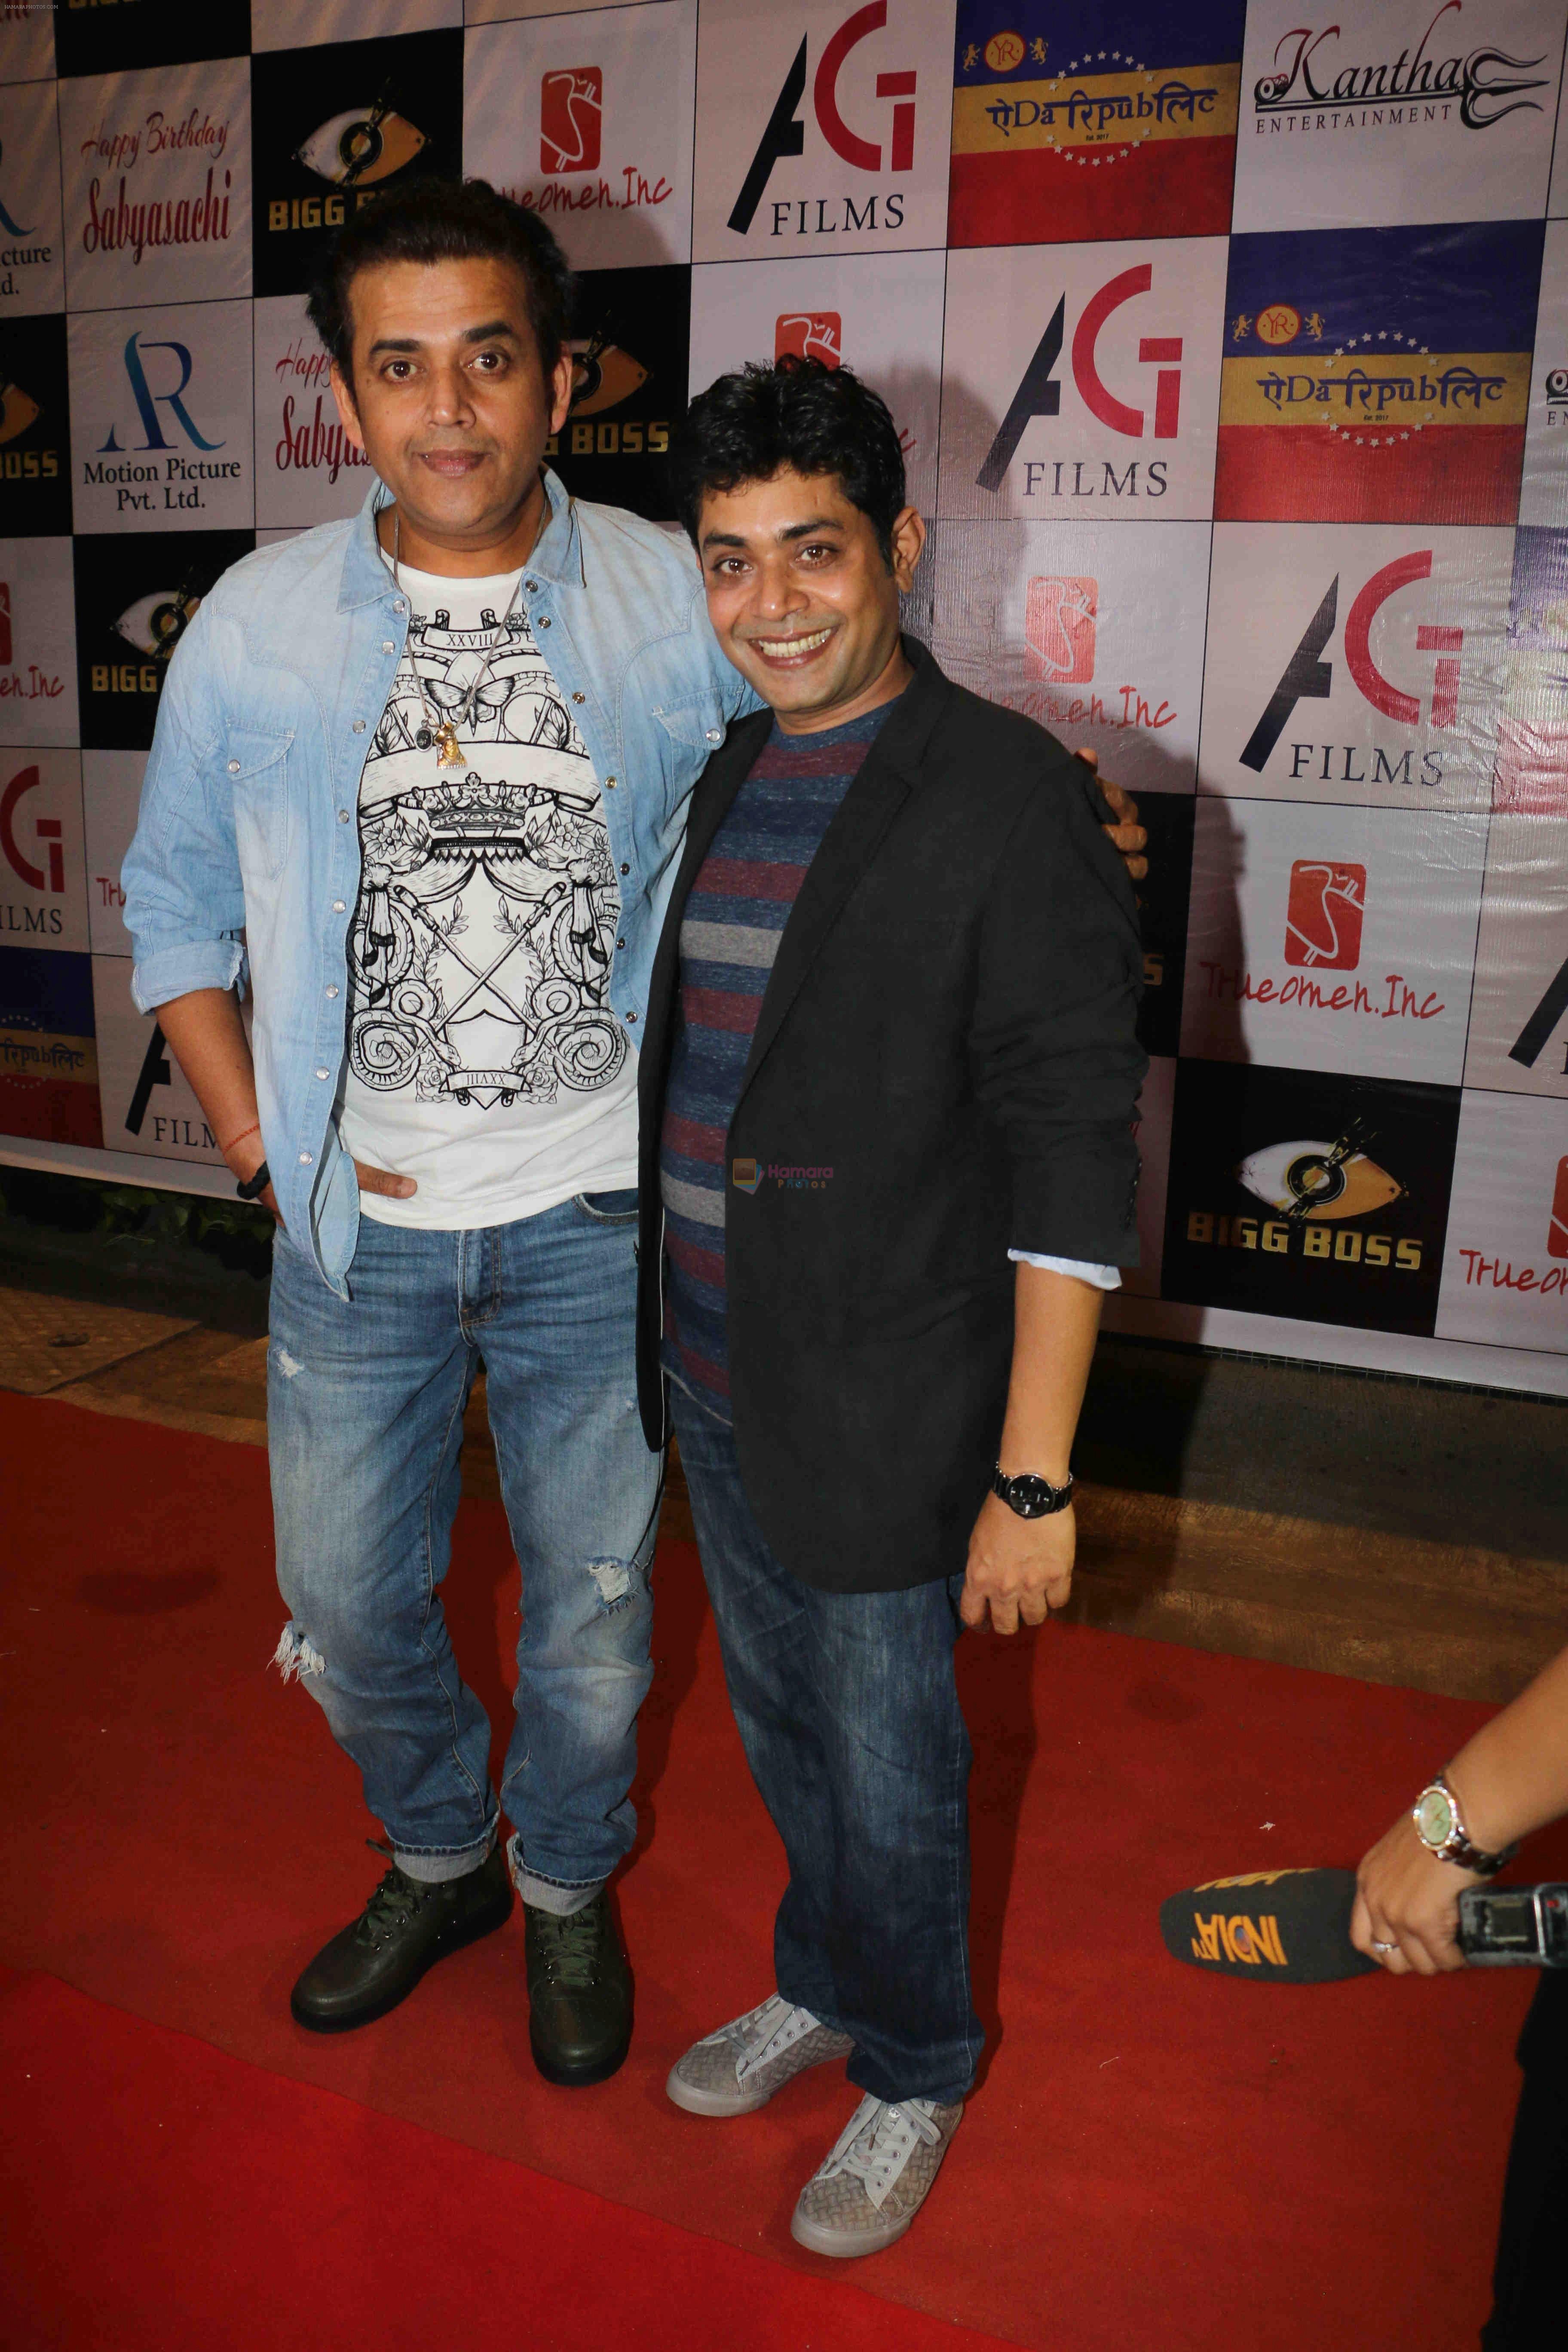 Ravi Kishan at AR Motion Pictures and Kantha Entertainment hosted a birthday bash for Sabyasachi Satpathy on 29th Jan 2018